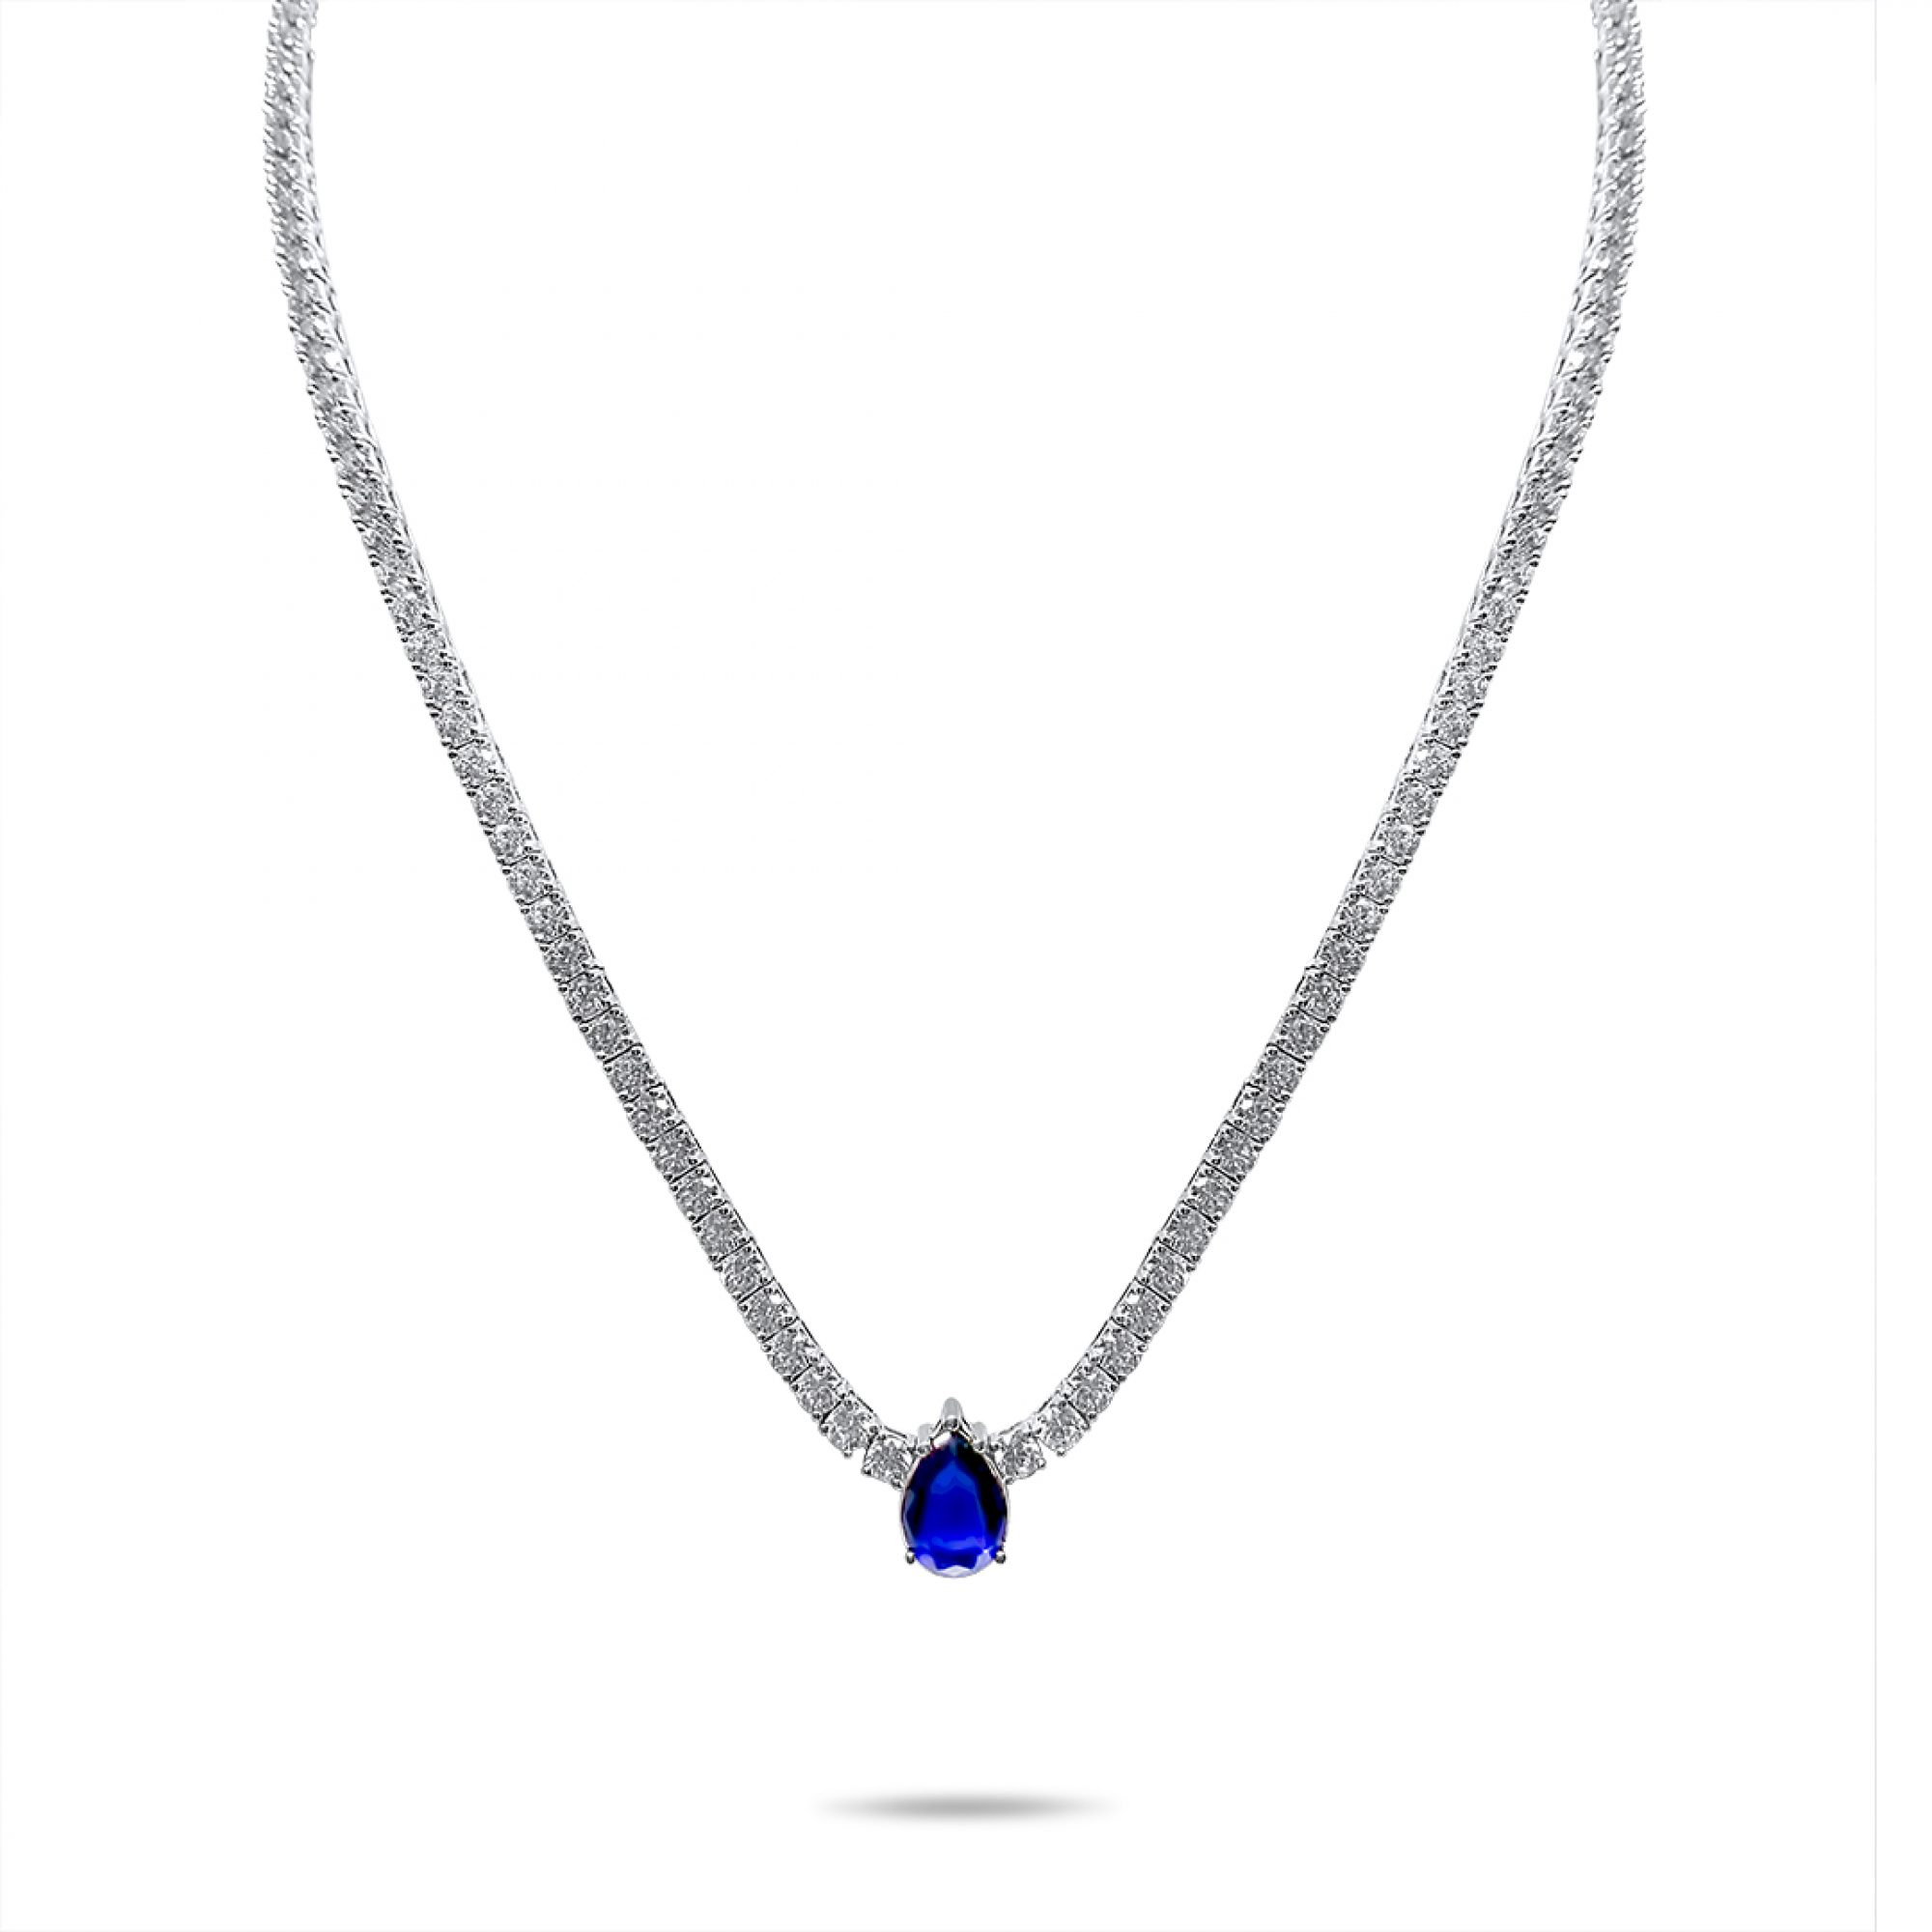 Silver necklace with sapphire and zircon stones